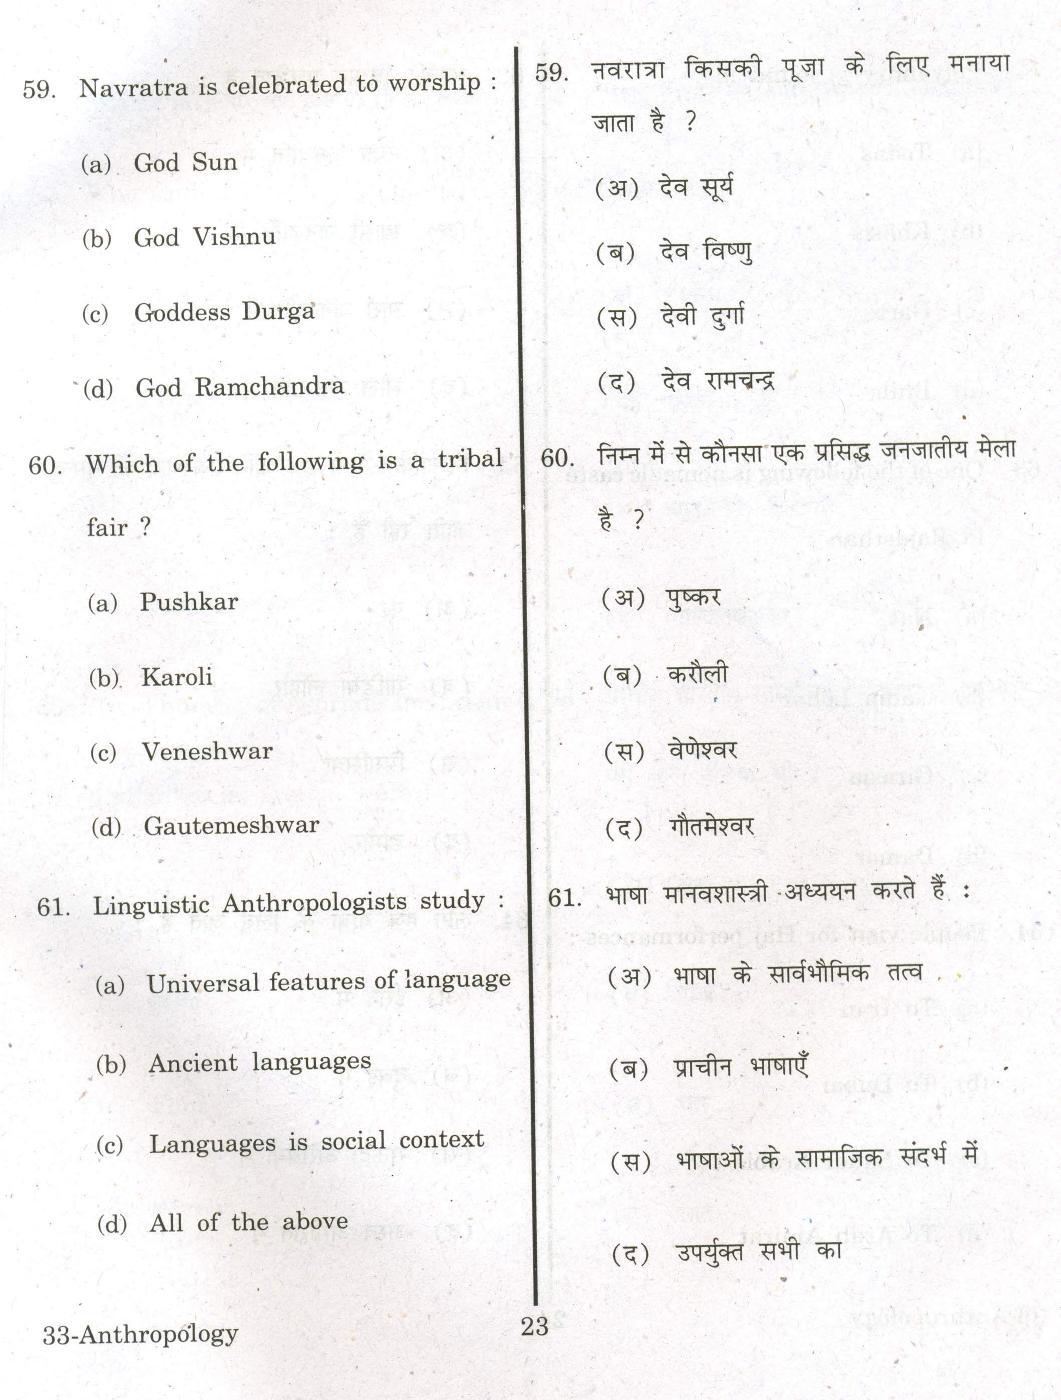 URATPG Anthropology 2013 Question Paper - Page 22